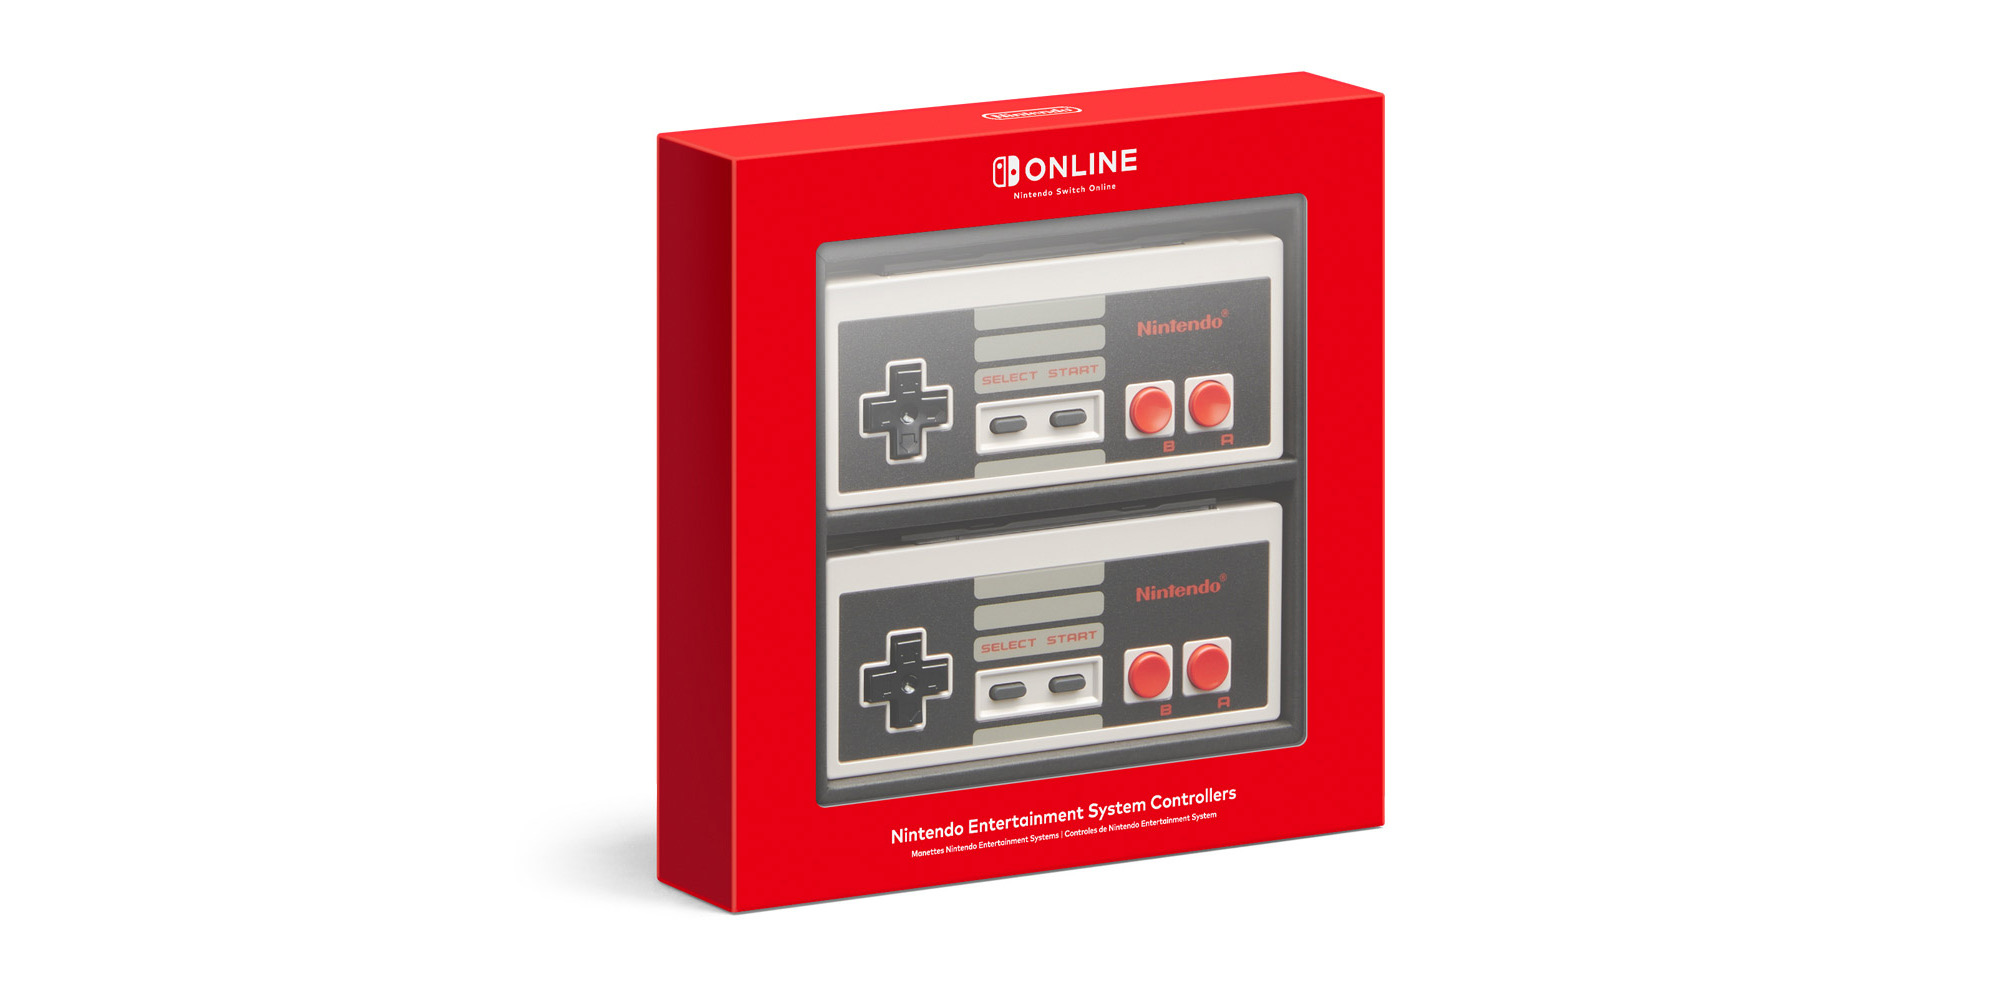 NES Controller sees rare drop to $47 (Switch Online Reg. $60)